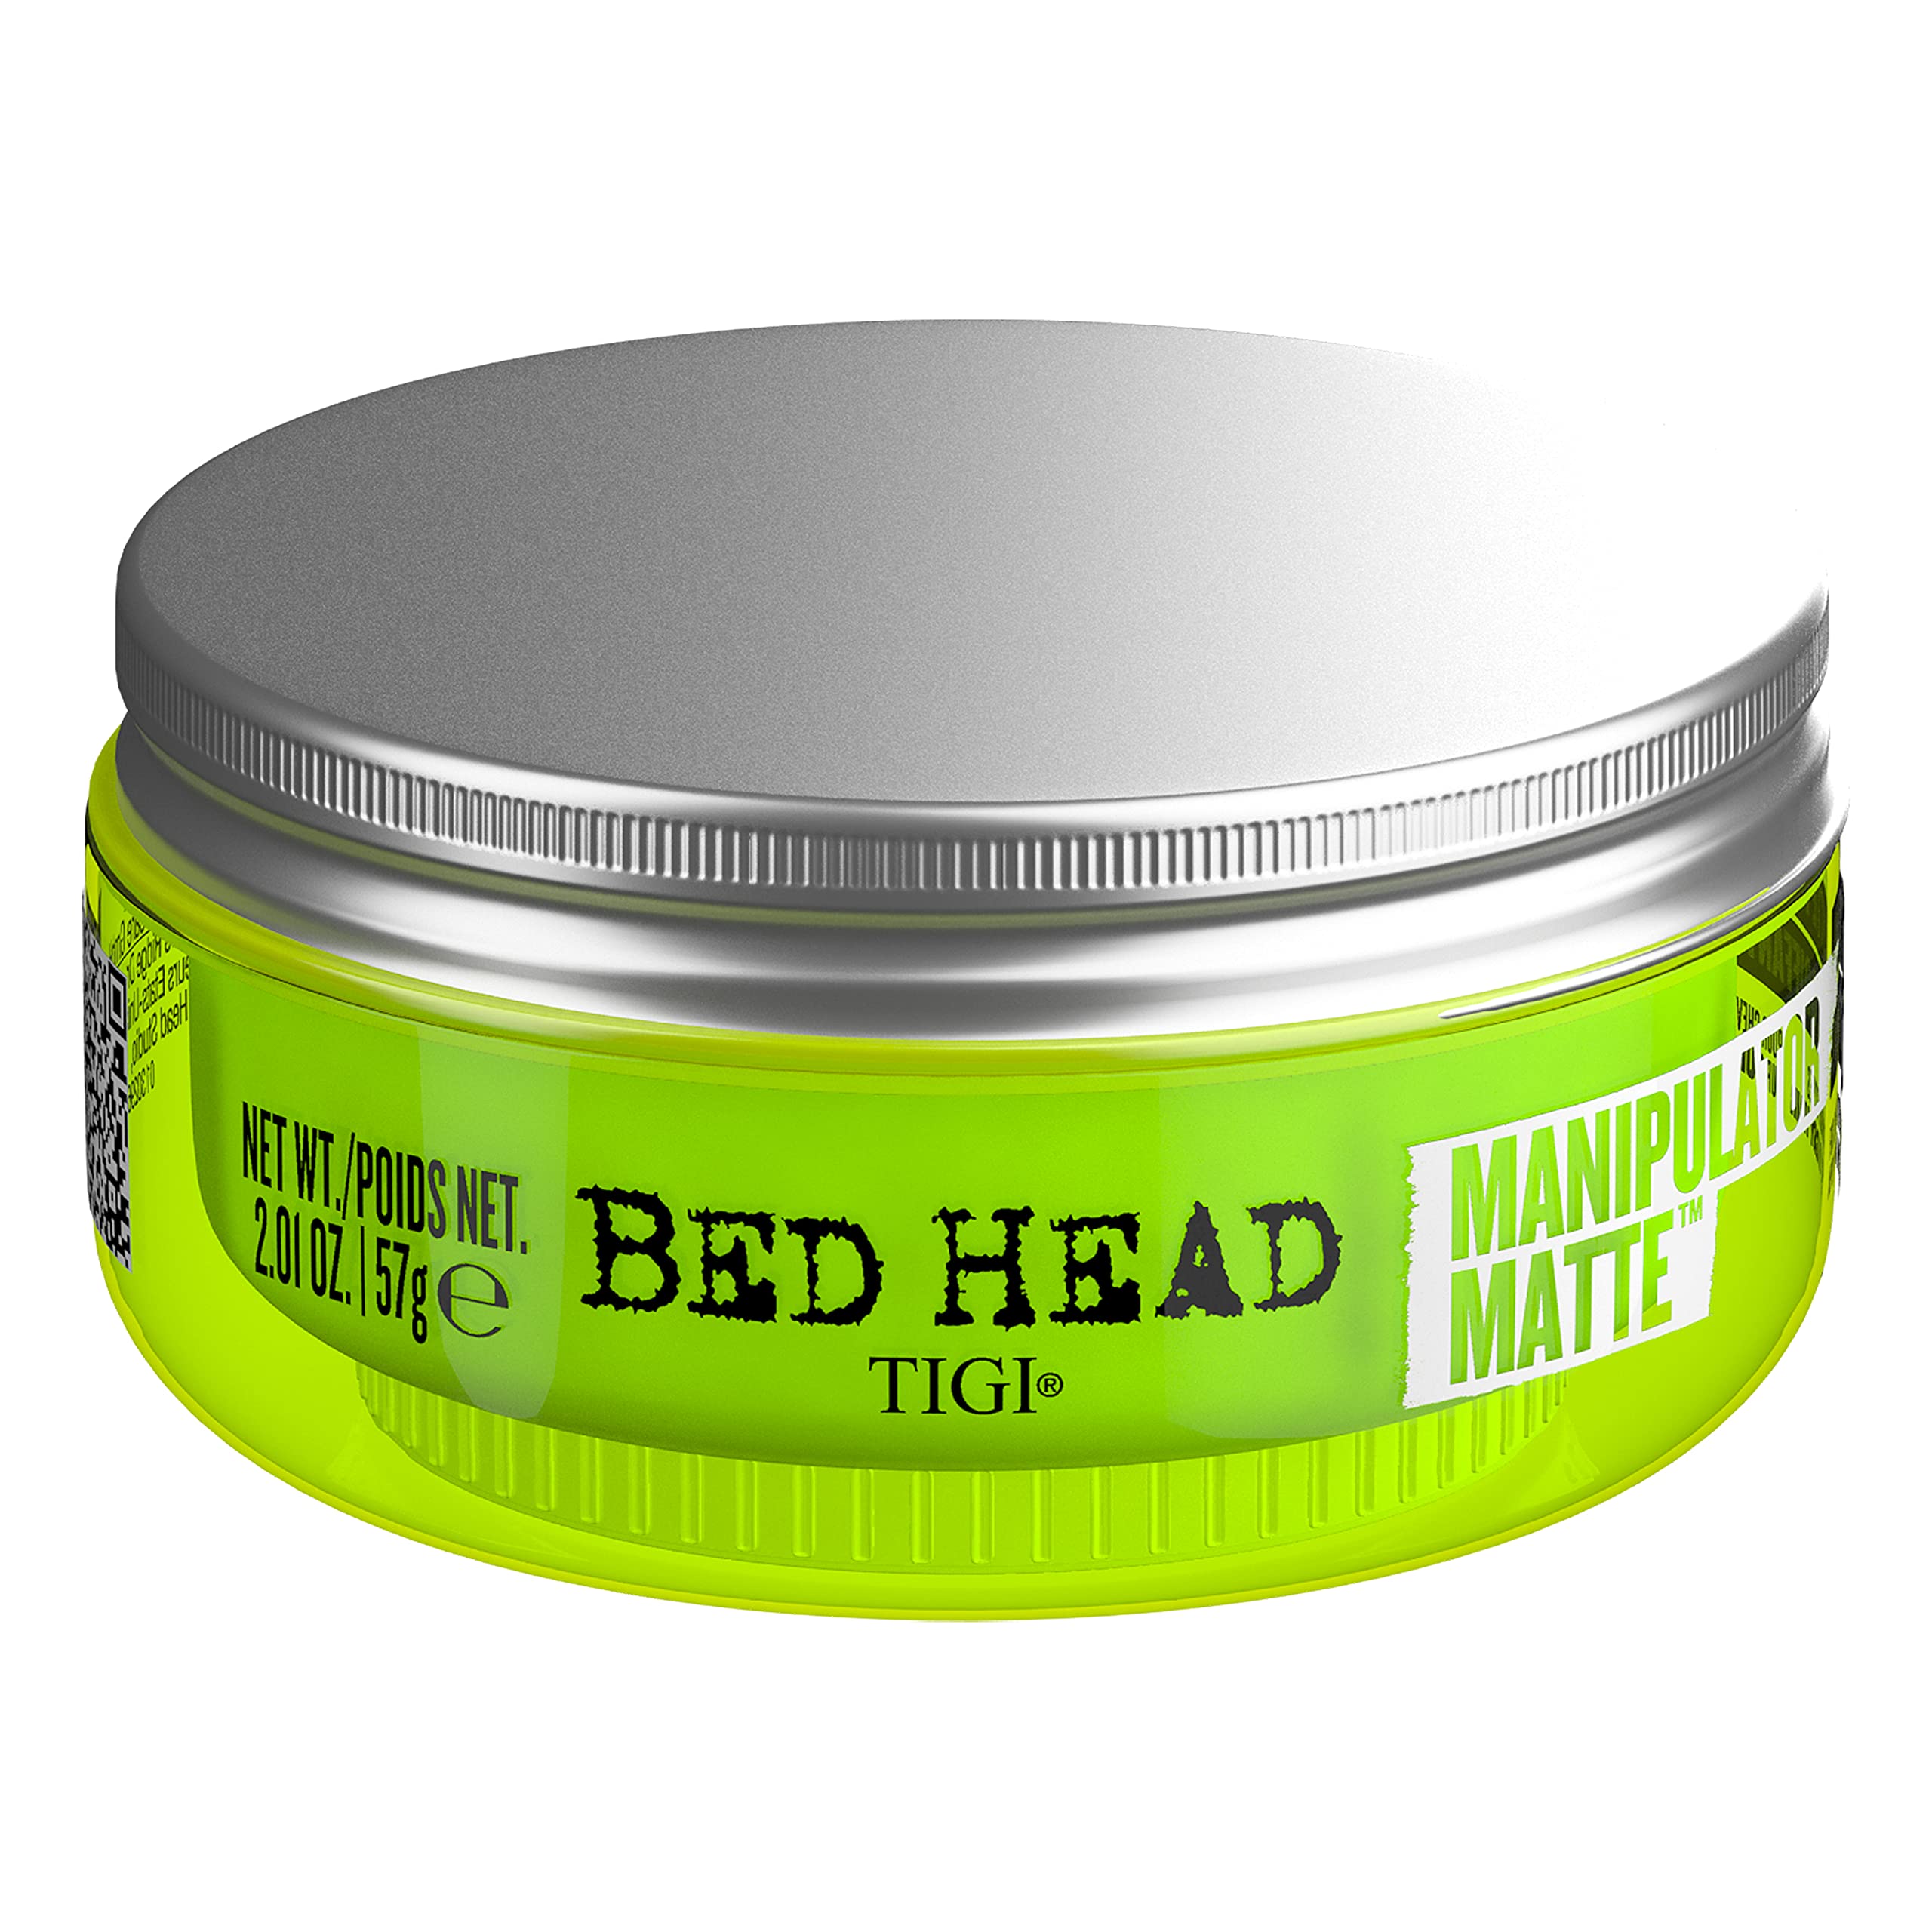 TIGI Bed Head Manipulator Matte Hair Wax Paste with Strong Hold 2.01 oz